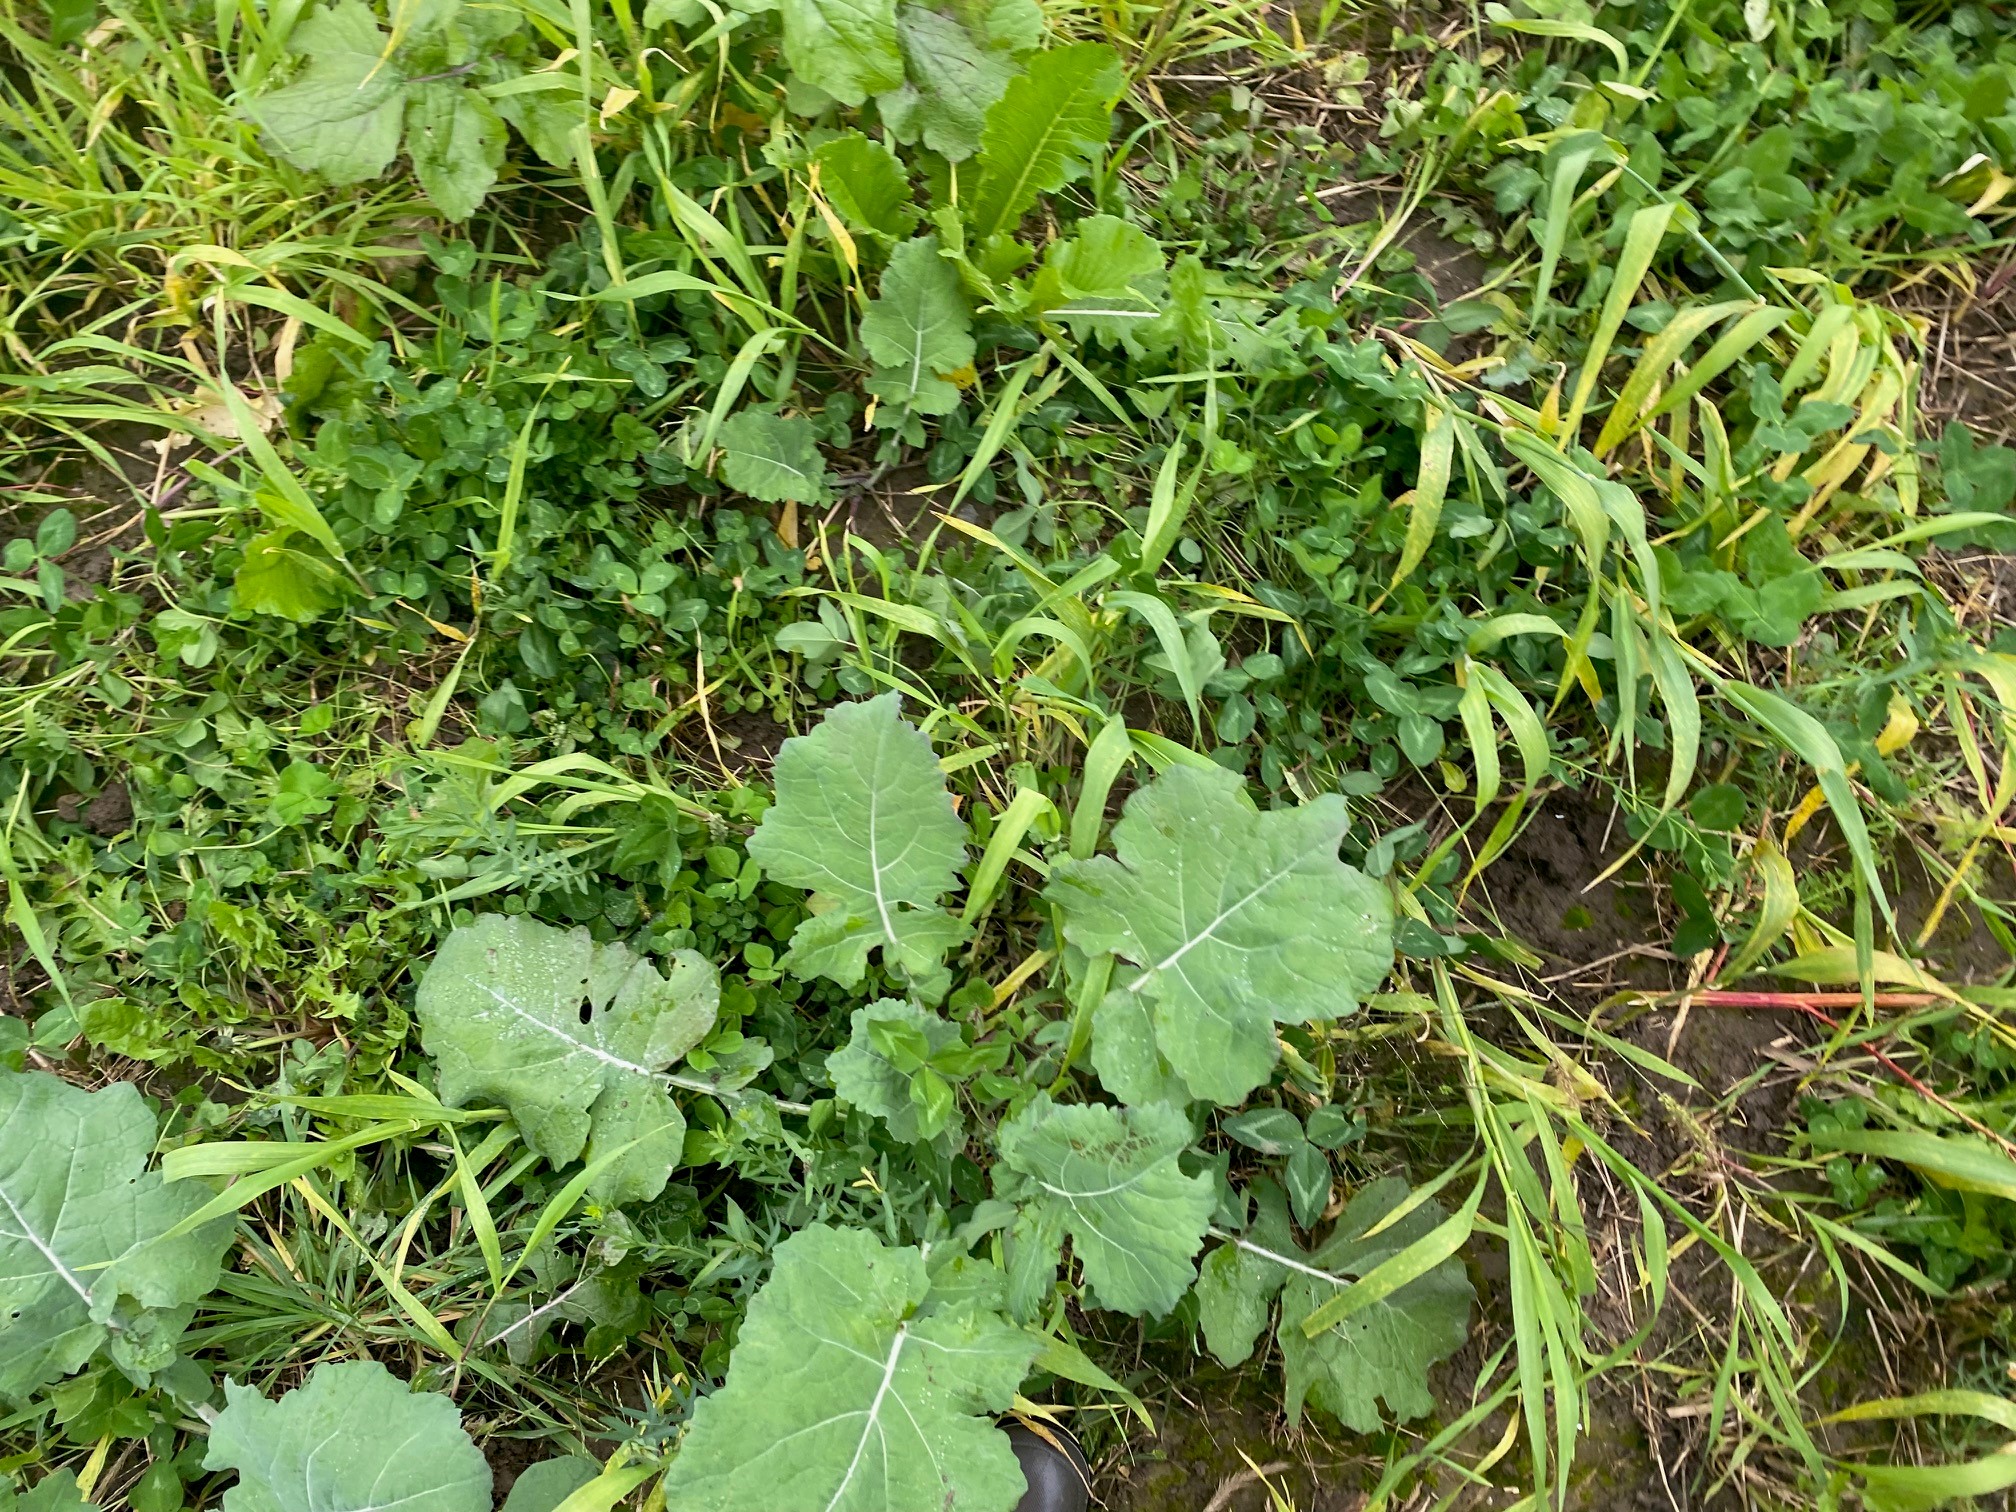 Cover crop mix of red clover, sunflower flax, turnip, radish and mustard after barley.